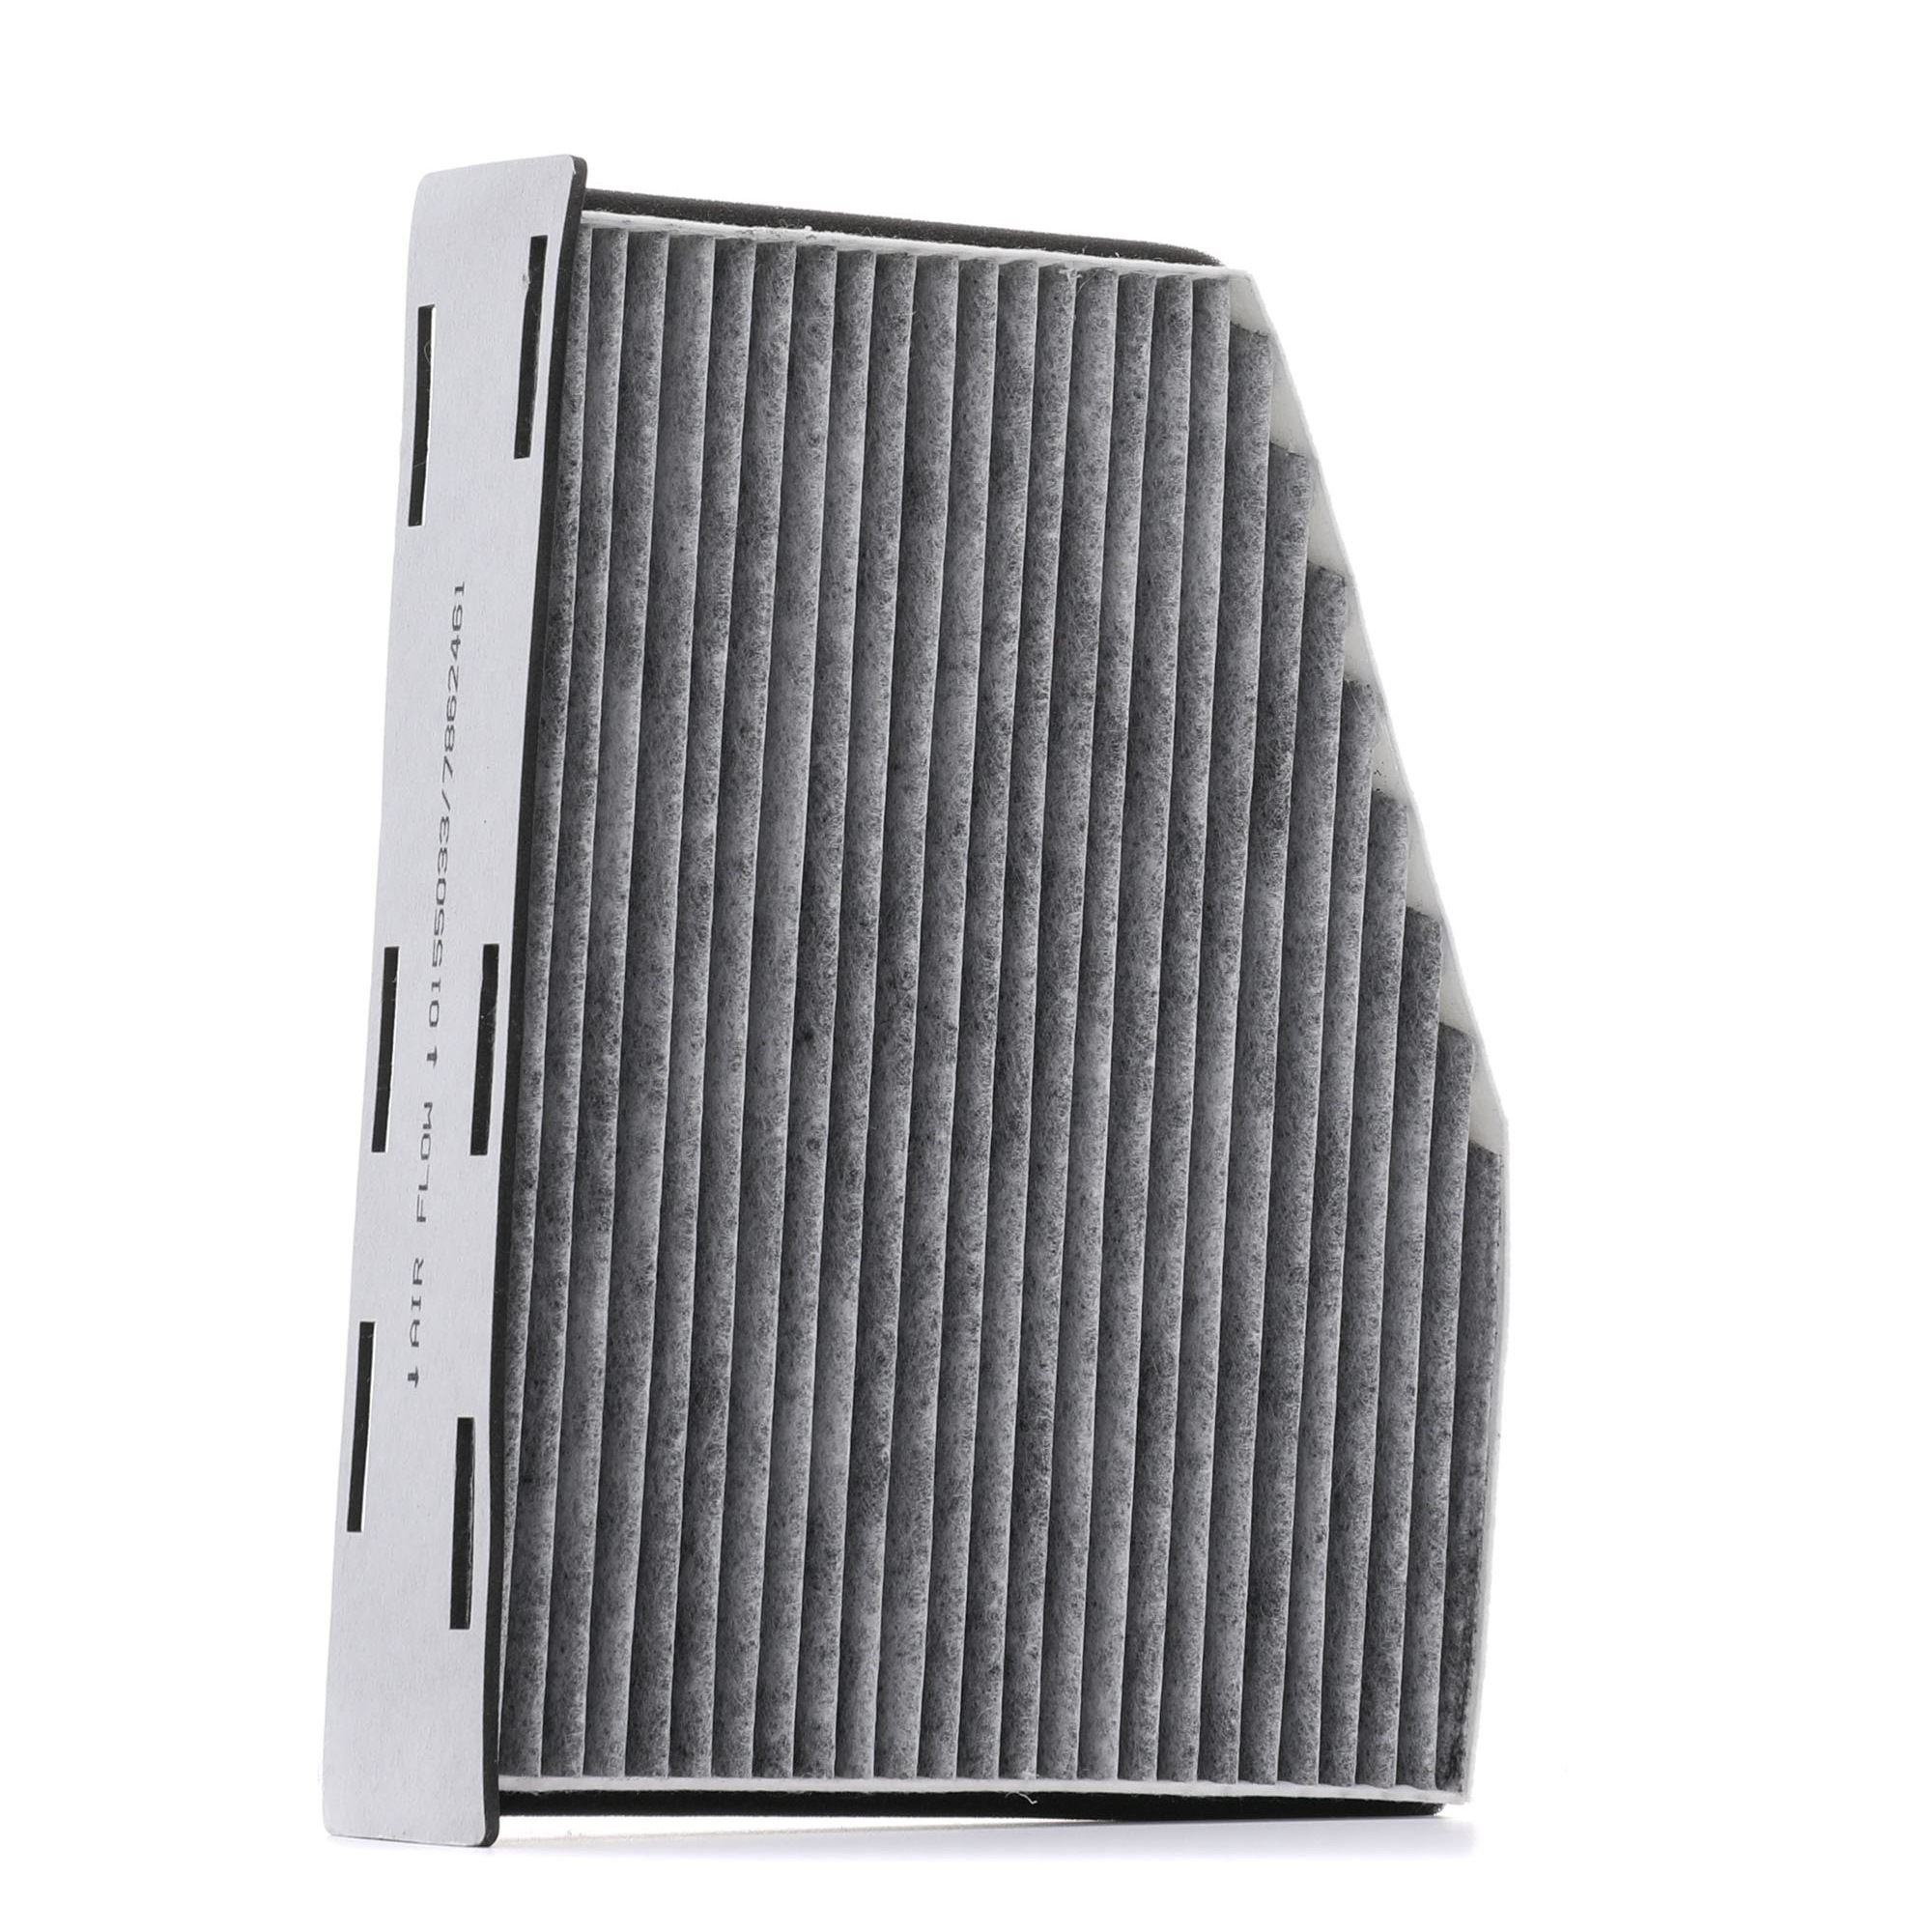 STARK Activated Carbon Filter, with Odour Absorbent Effect, Filter Insert, 288 mm x 210 mm x 58 mm, Asymmetrical Width: 210mm, Height: 58mm, Length: 288mm Cabin filter SKIF-0170219 buy